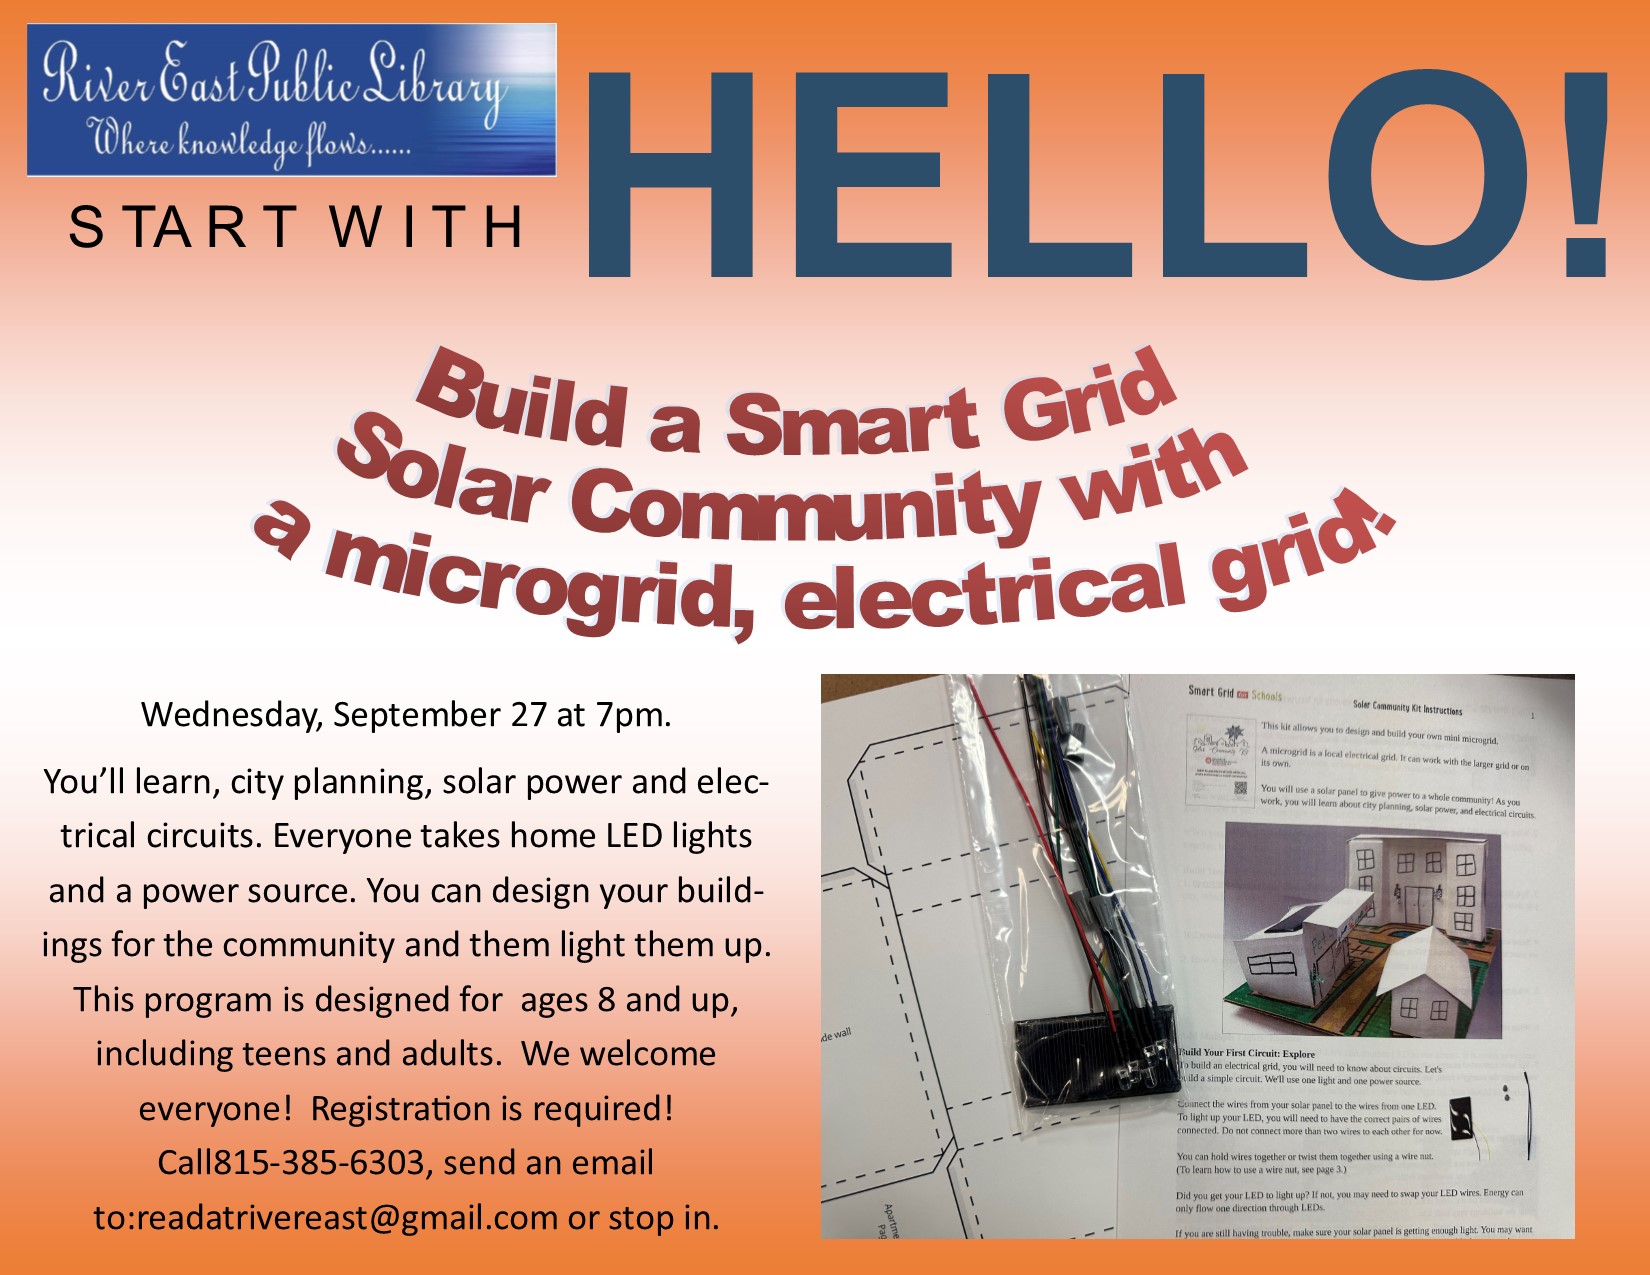 Flyer advertising our upcoming Solar Electrical Grid project